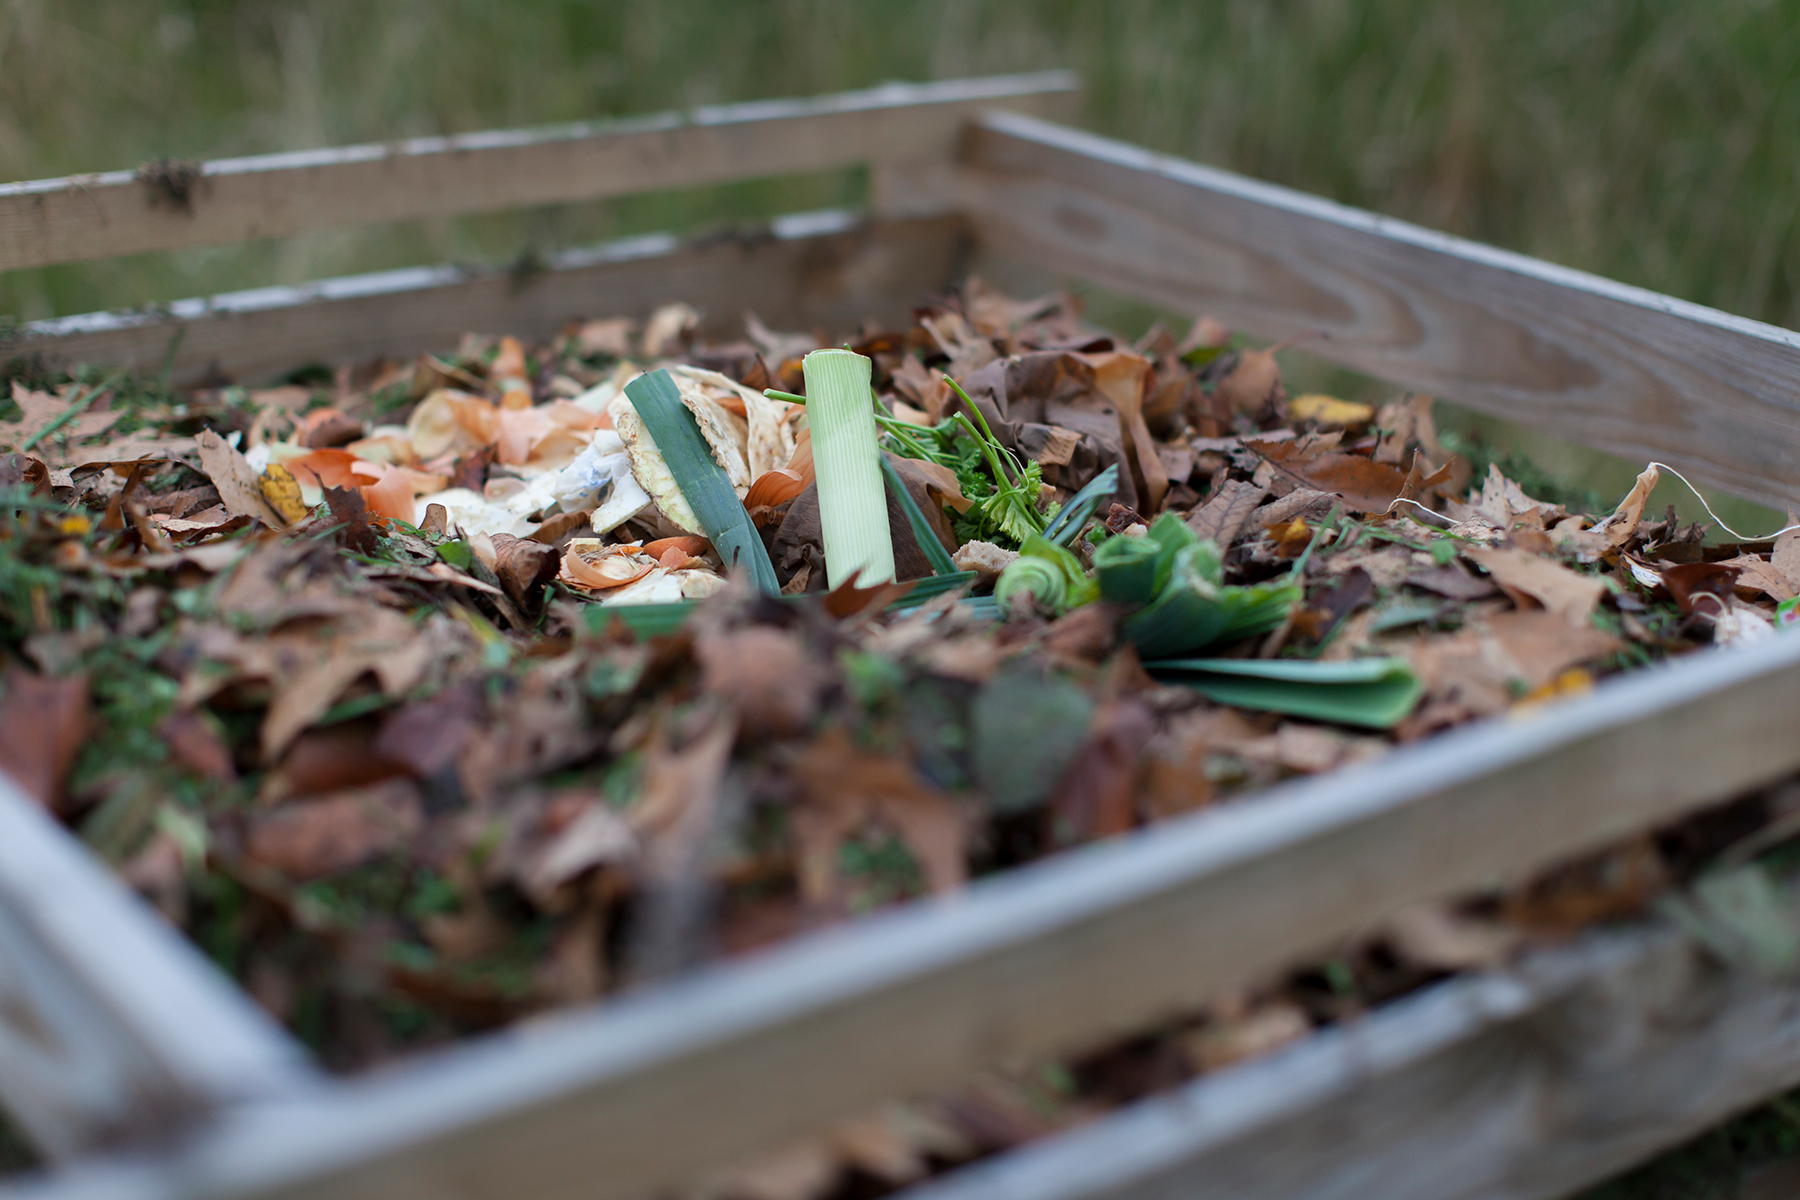 A wooden compost bin with some vegetable remains on top